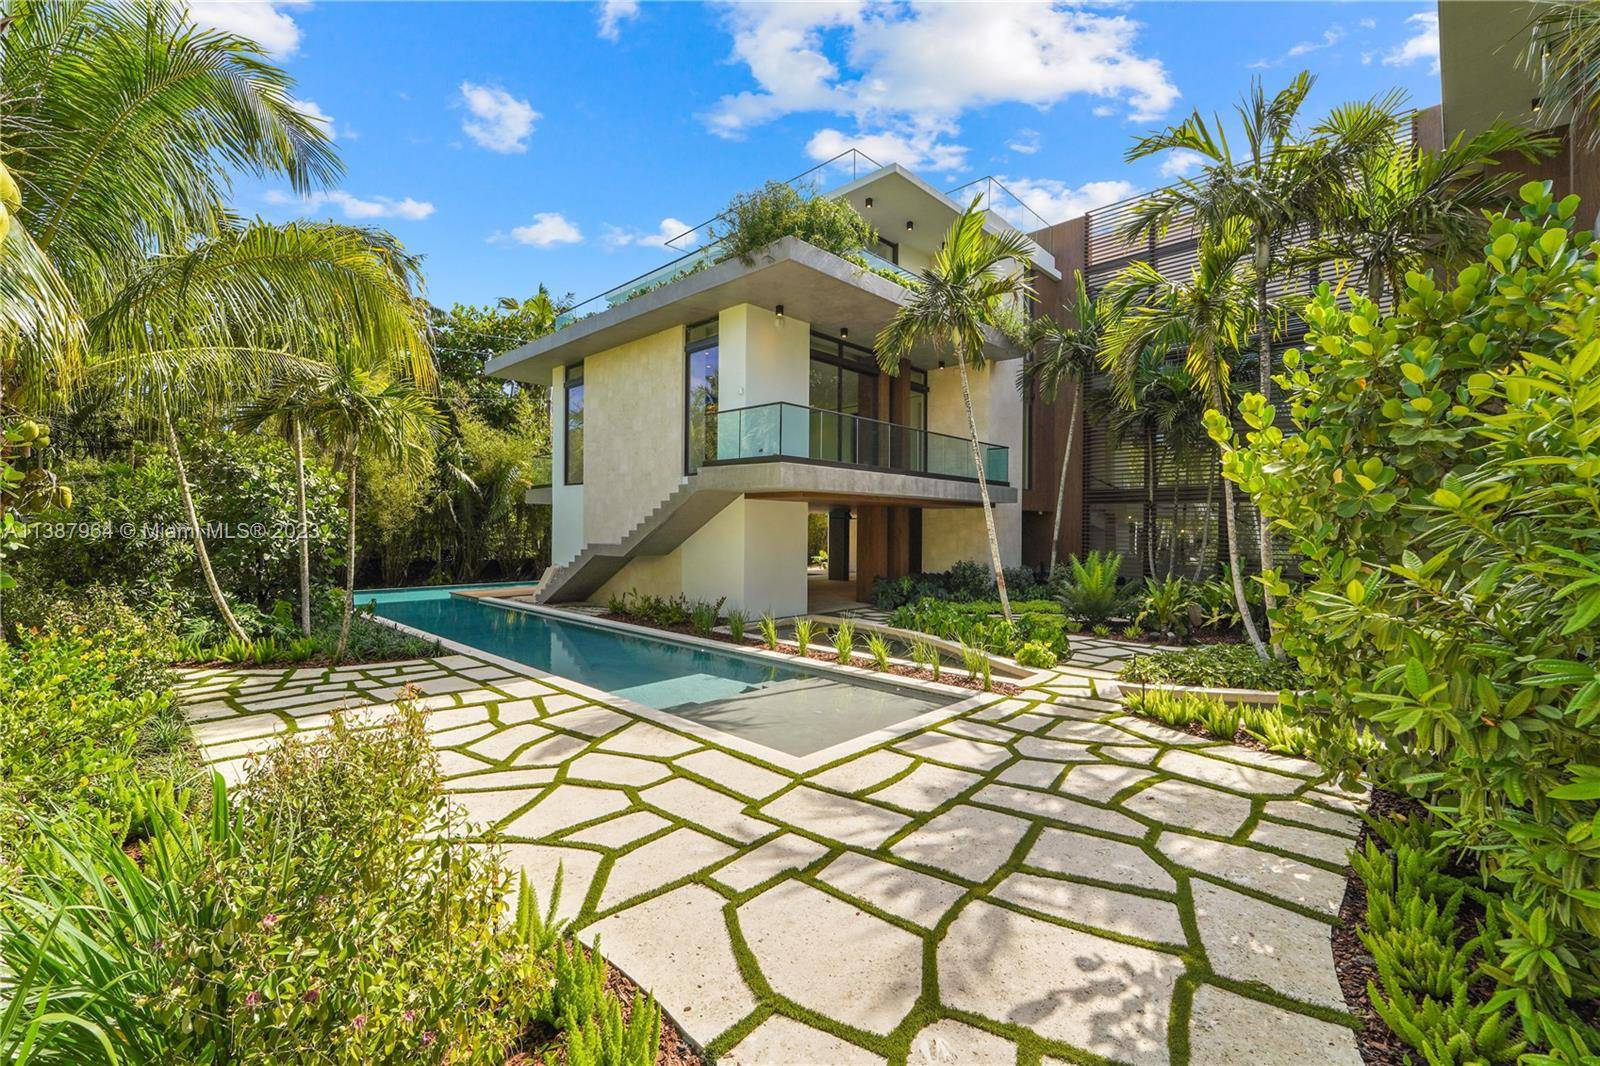 Just Completed Tropical Modern Oasis with 20, 000 total sf of seamless indoor outdoor living that highlights the best of South Florida lifestyle.